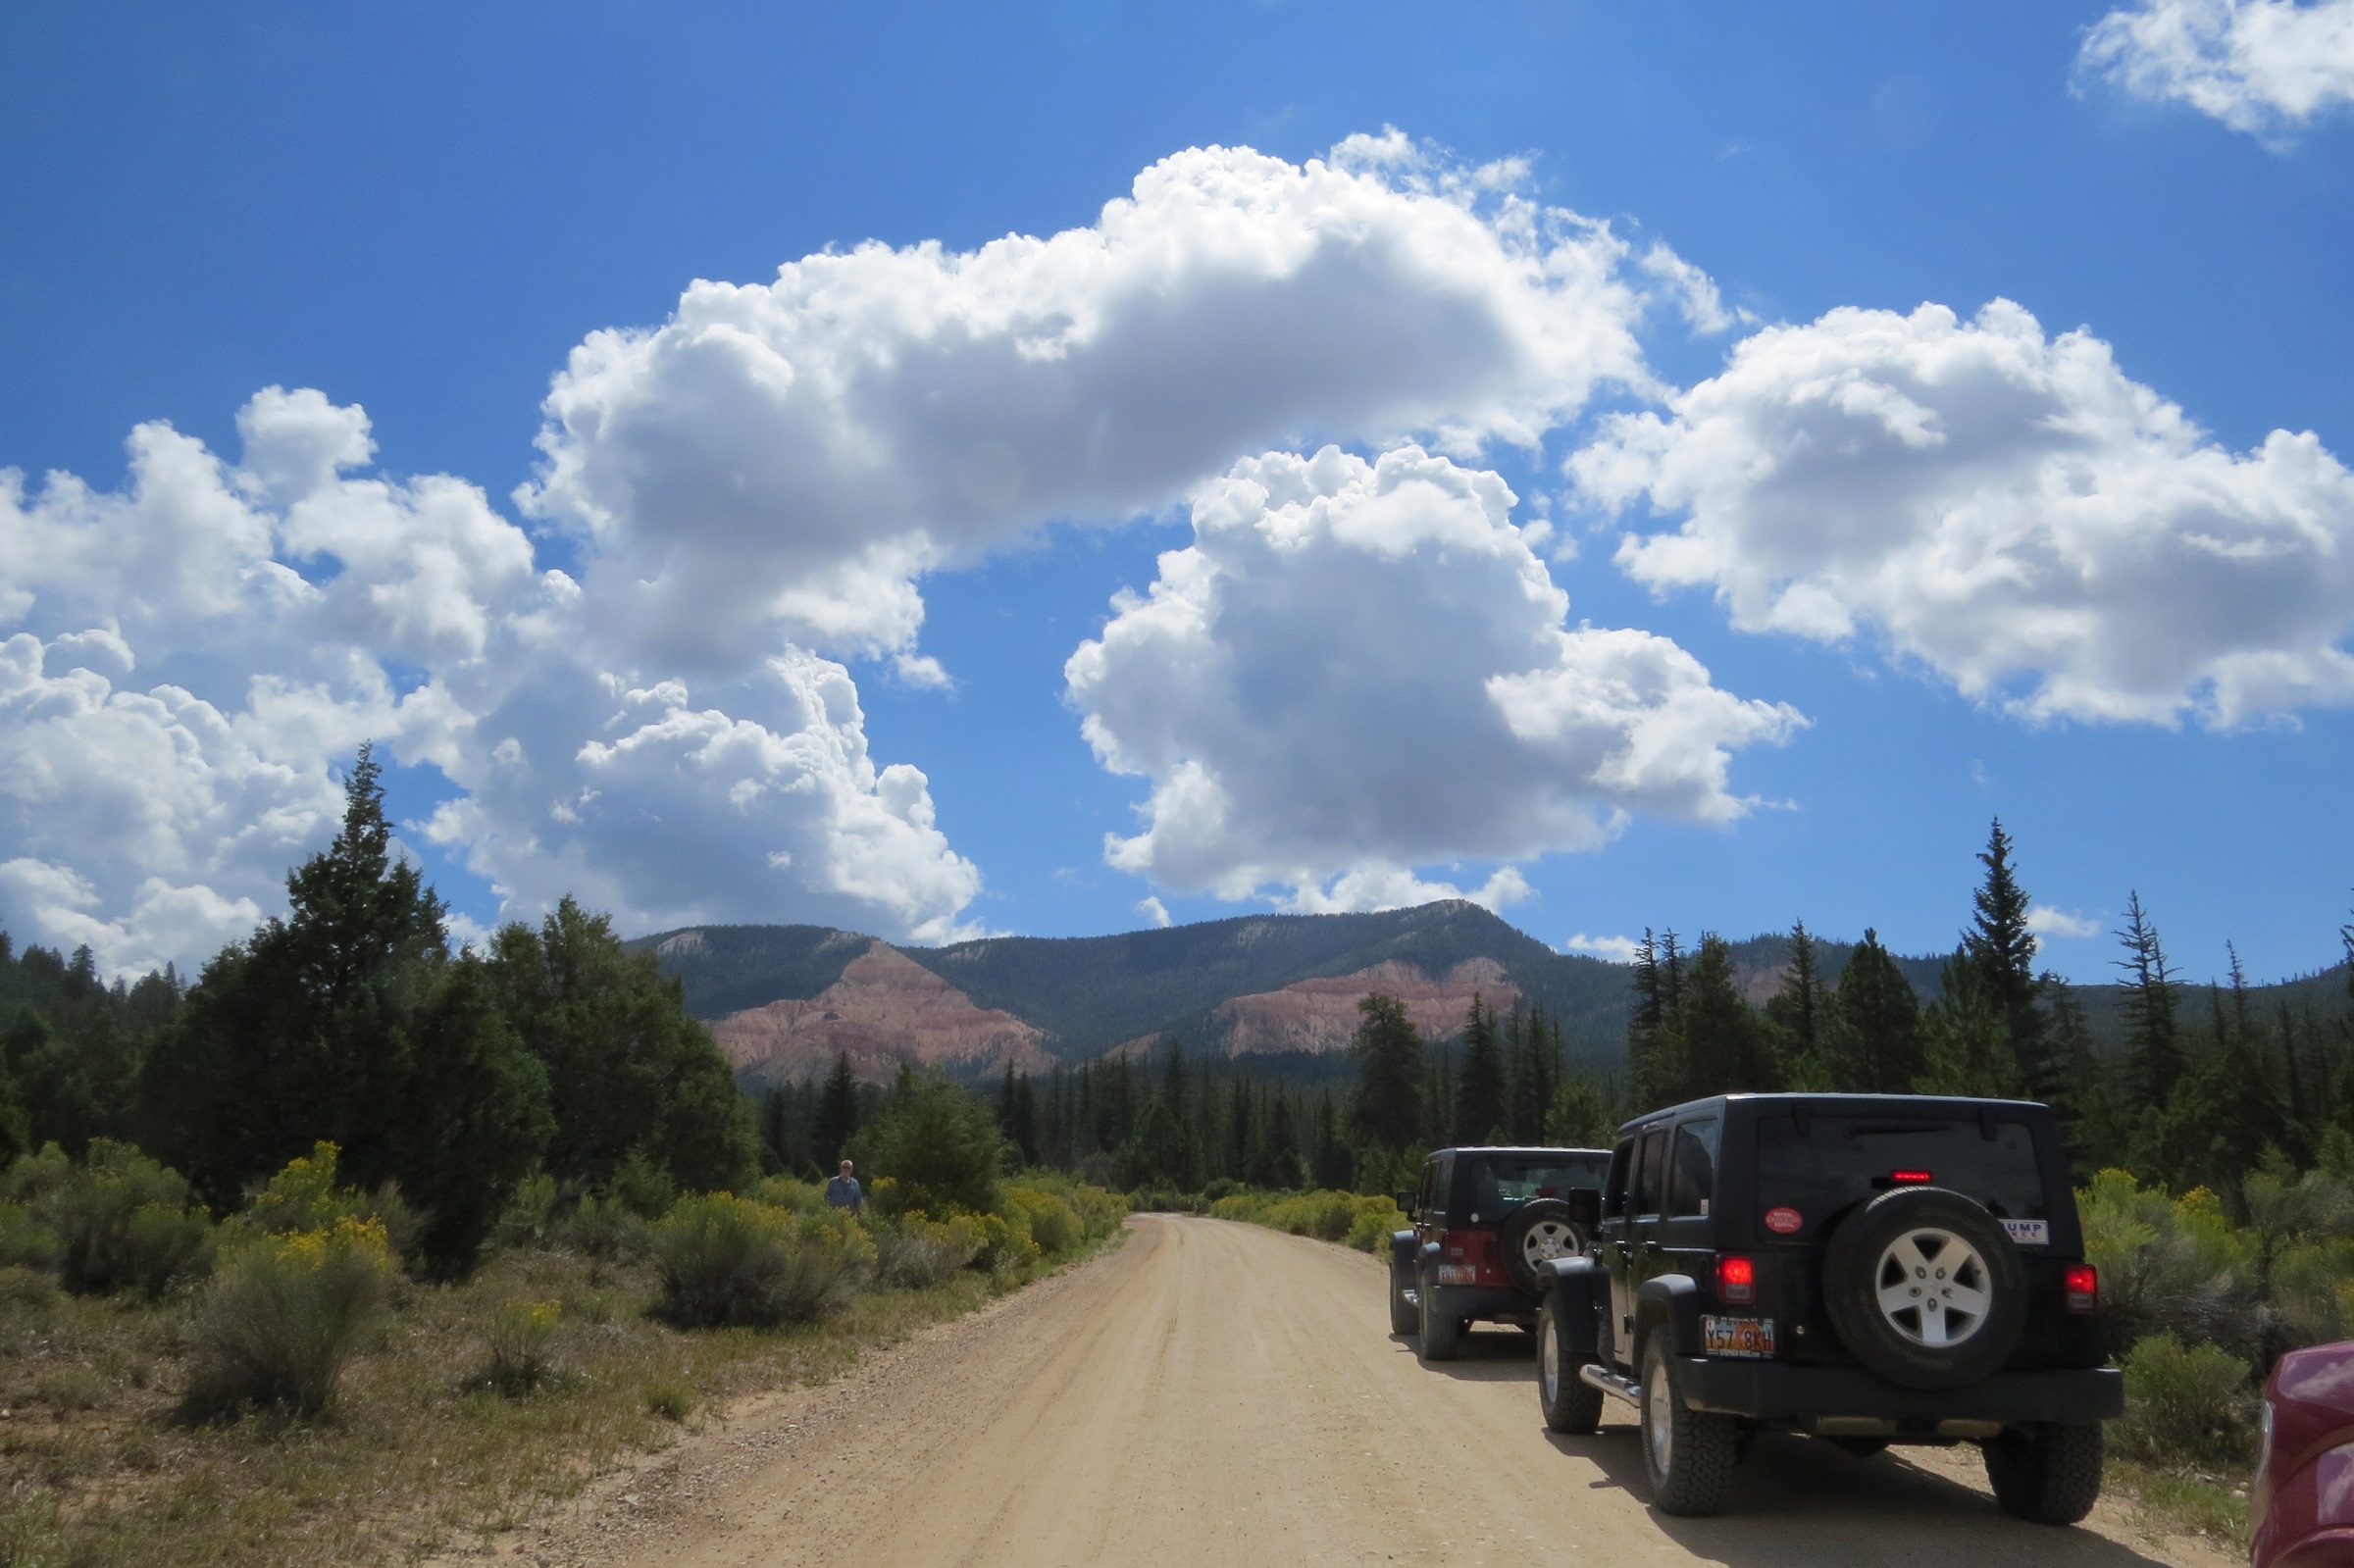 The leading cars in a caravan on Forest Service Road 132